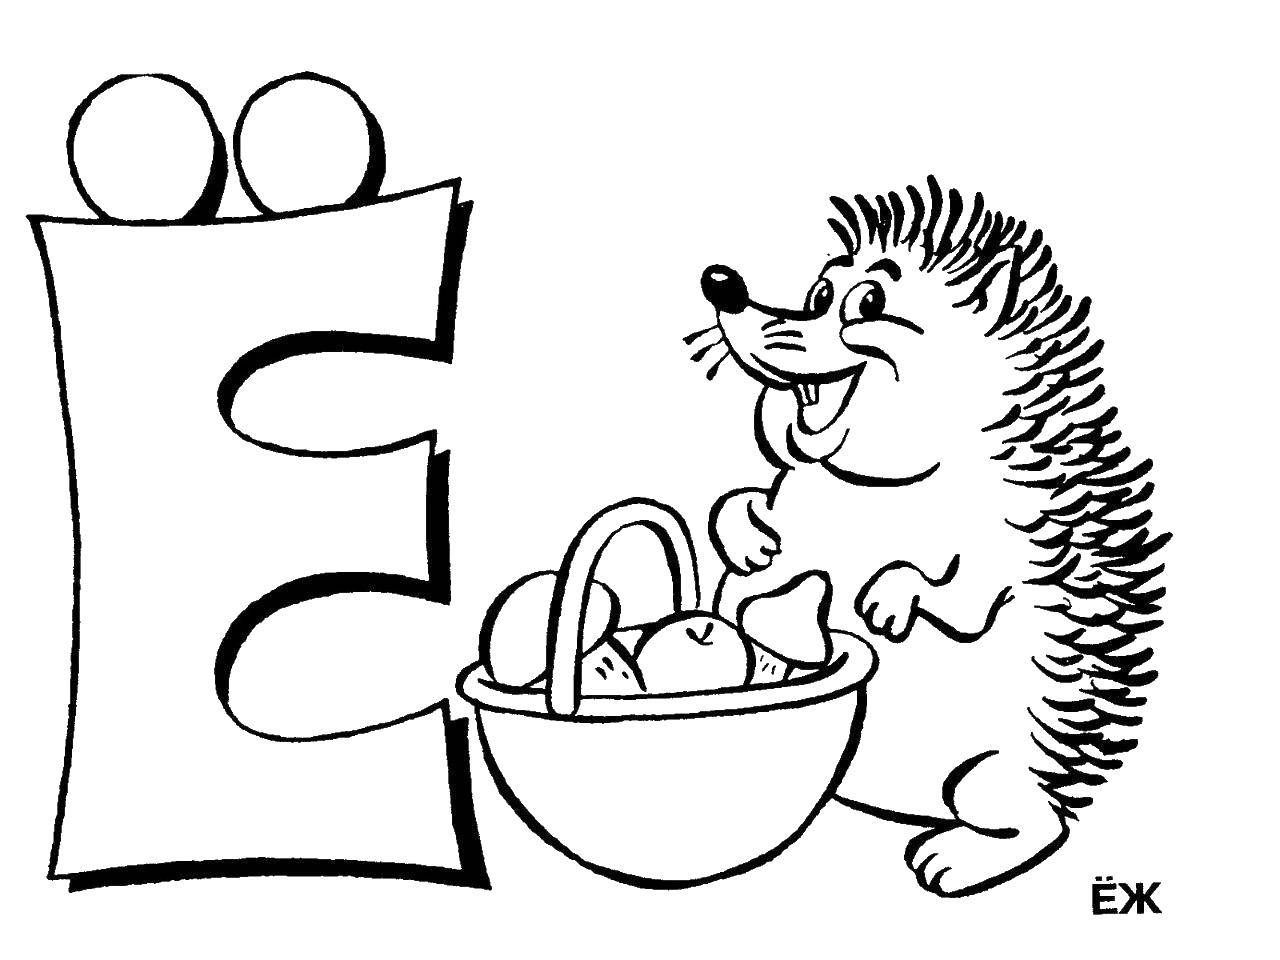 Coloring The letter e. Category the alphabet. Tags:  the letter, hedgehog, apples.